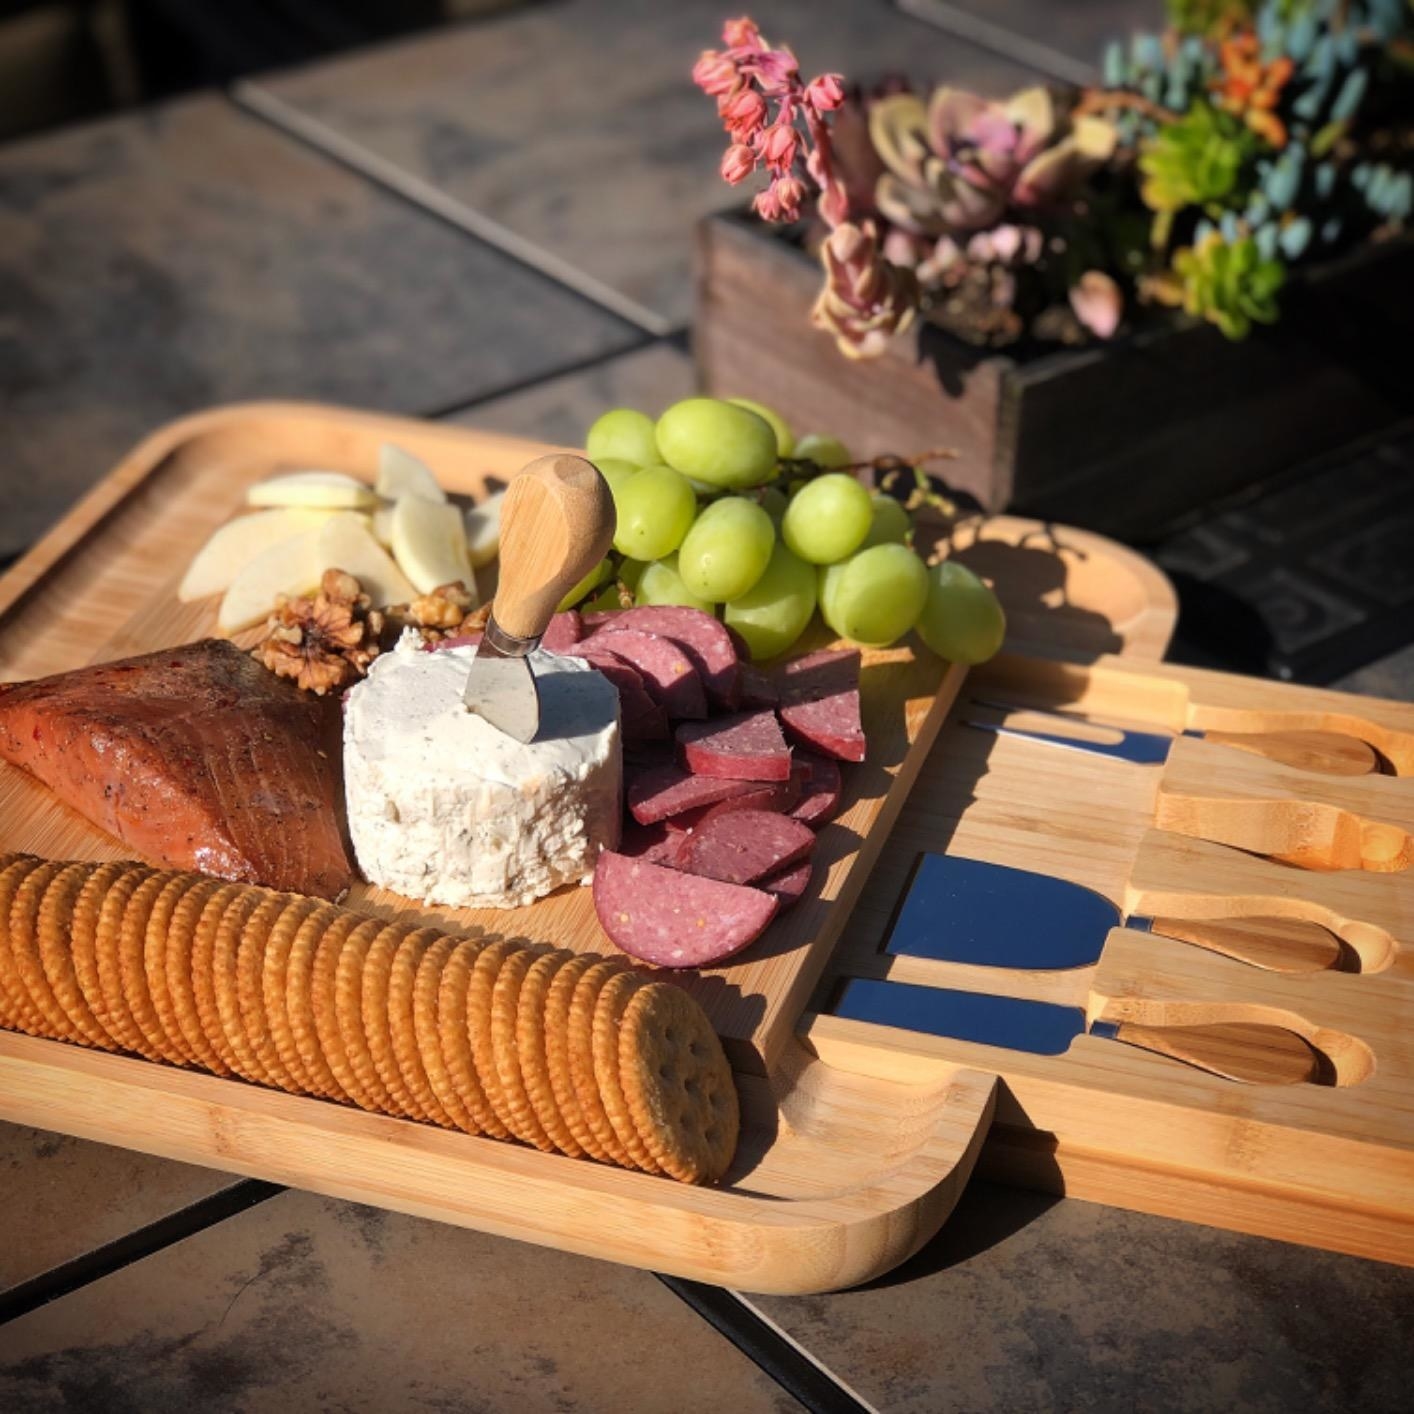 Reviewer photo of meats, cheeses, fruits and crackers placed on charcuterie board